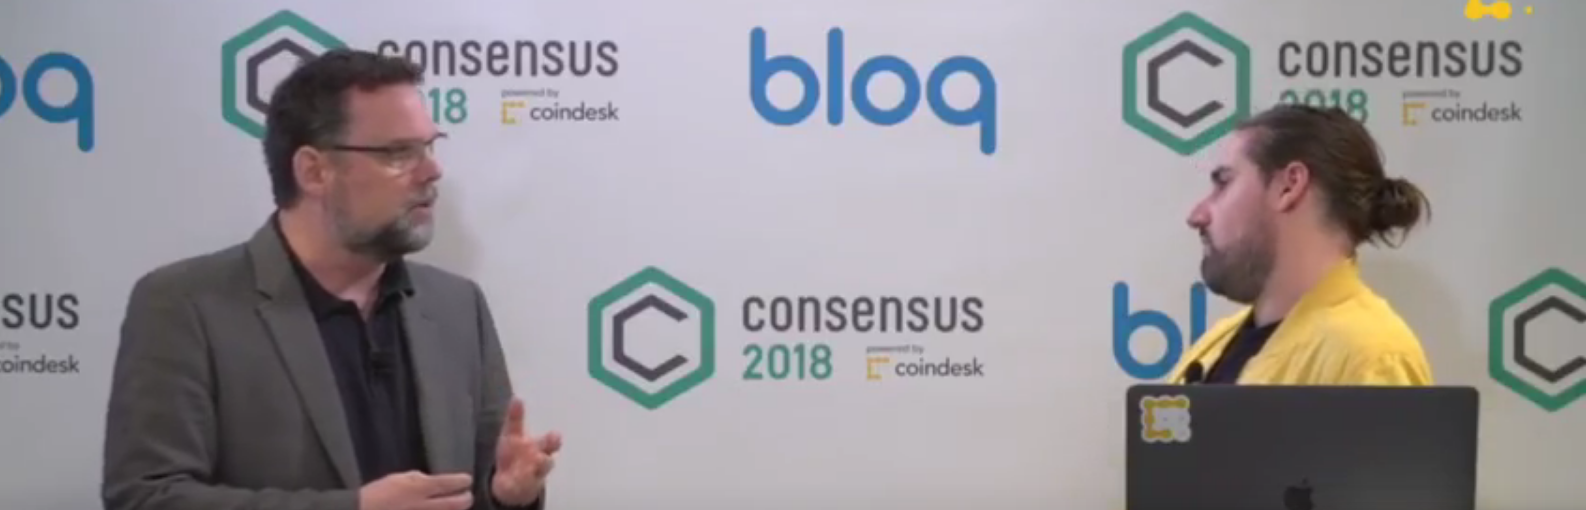 John Wolpert of ConsenSys talks awesomeness at Consensus 2018 CoinDeskLIVE